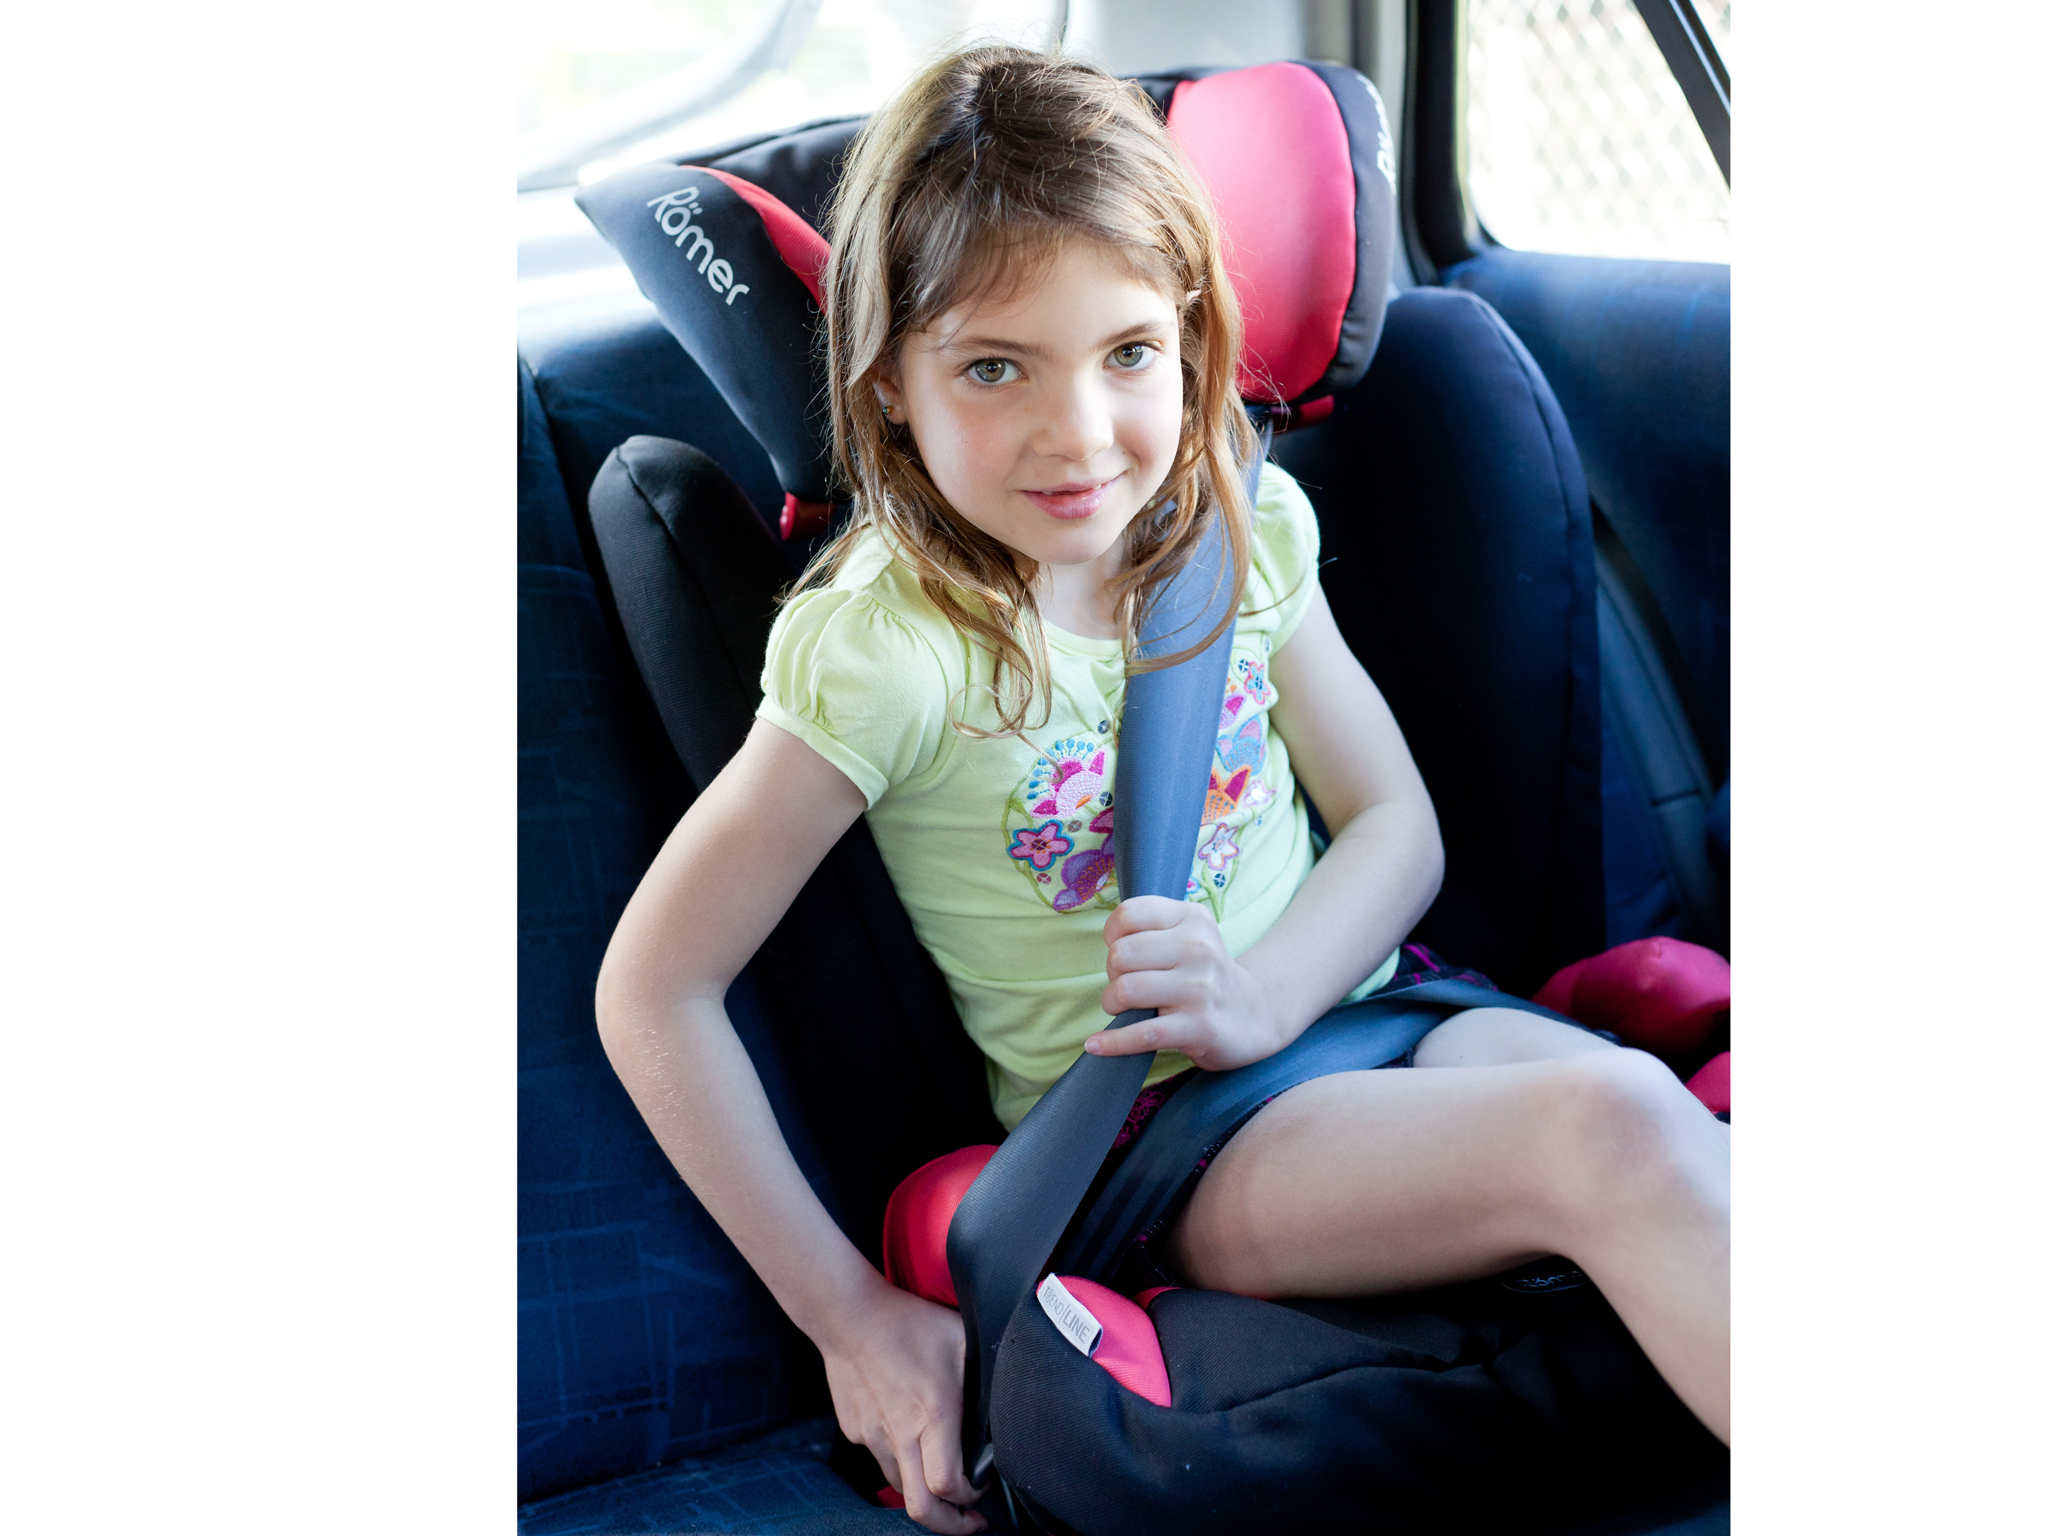 High-backed booster seat often have adjustable head rests and is the next step up from the forward facing seat